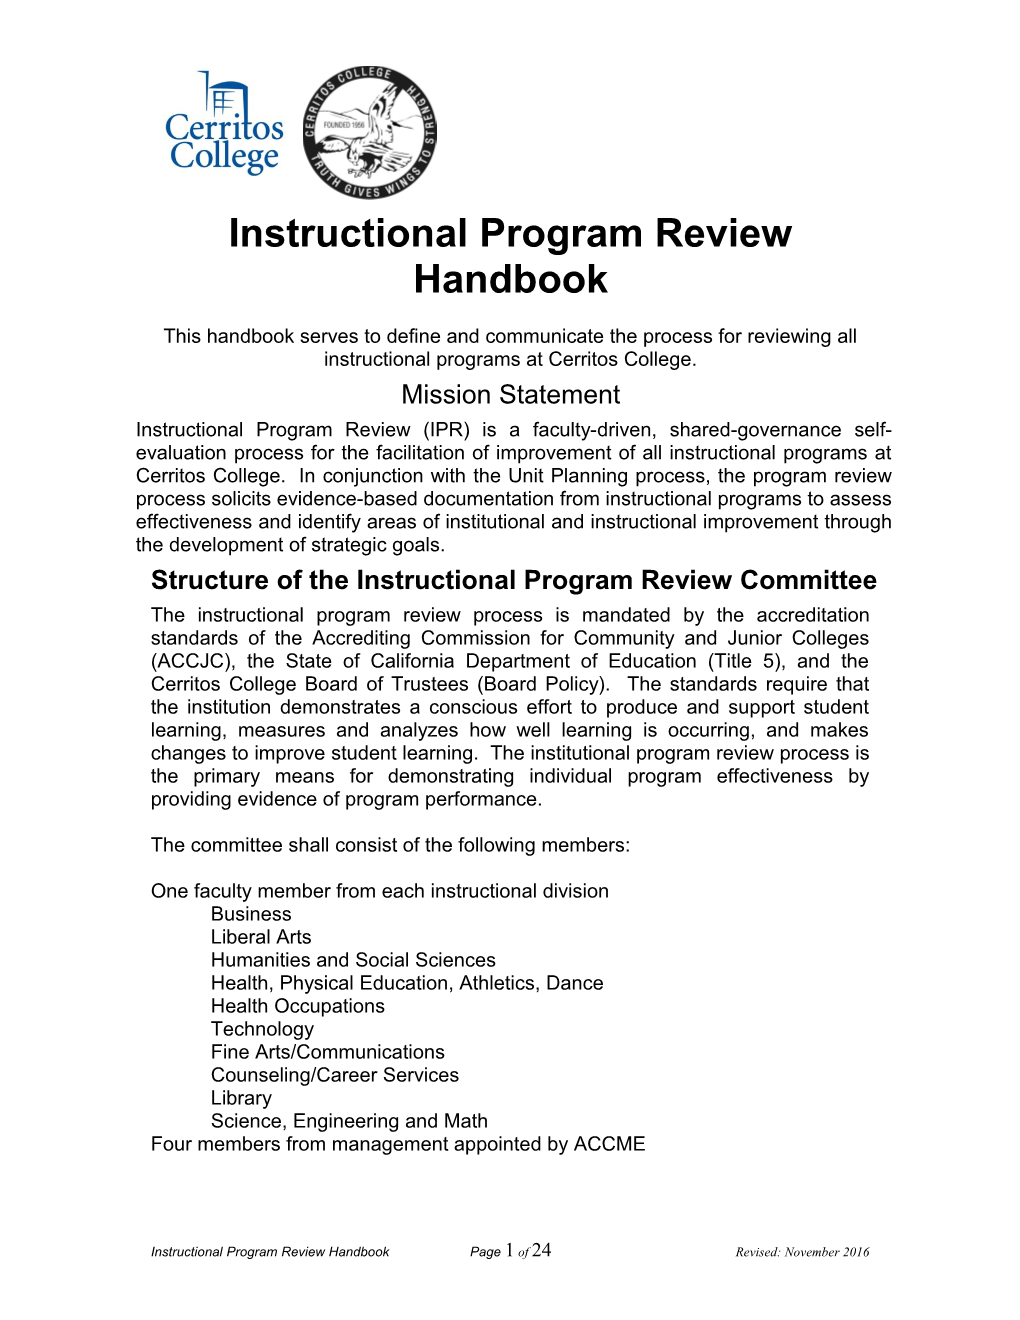 The Self-Evaluation Process For Instructional Programs